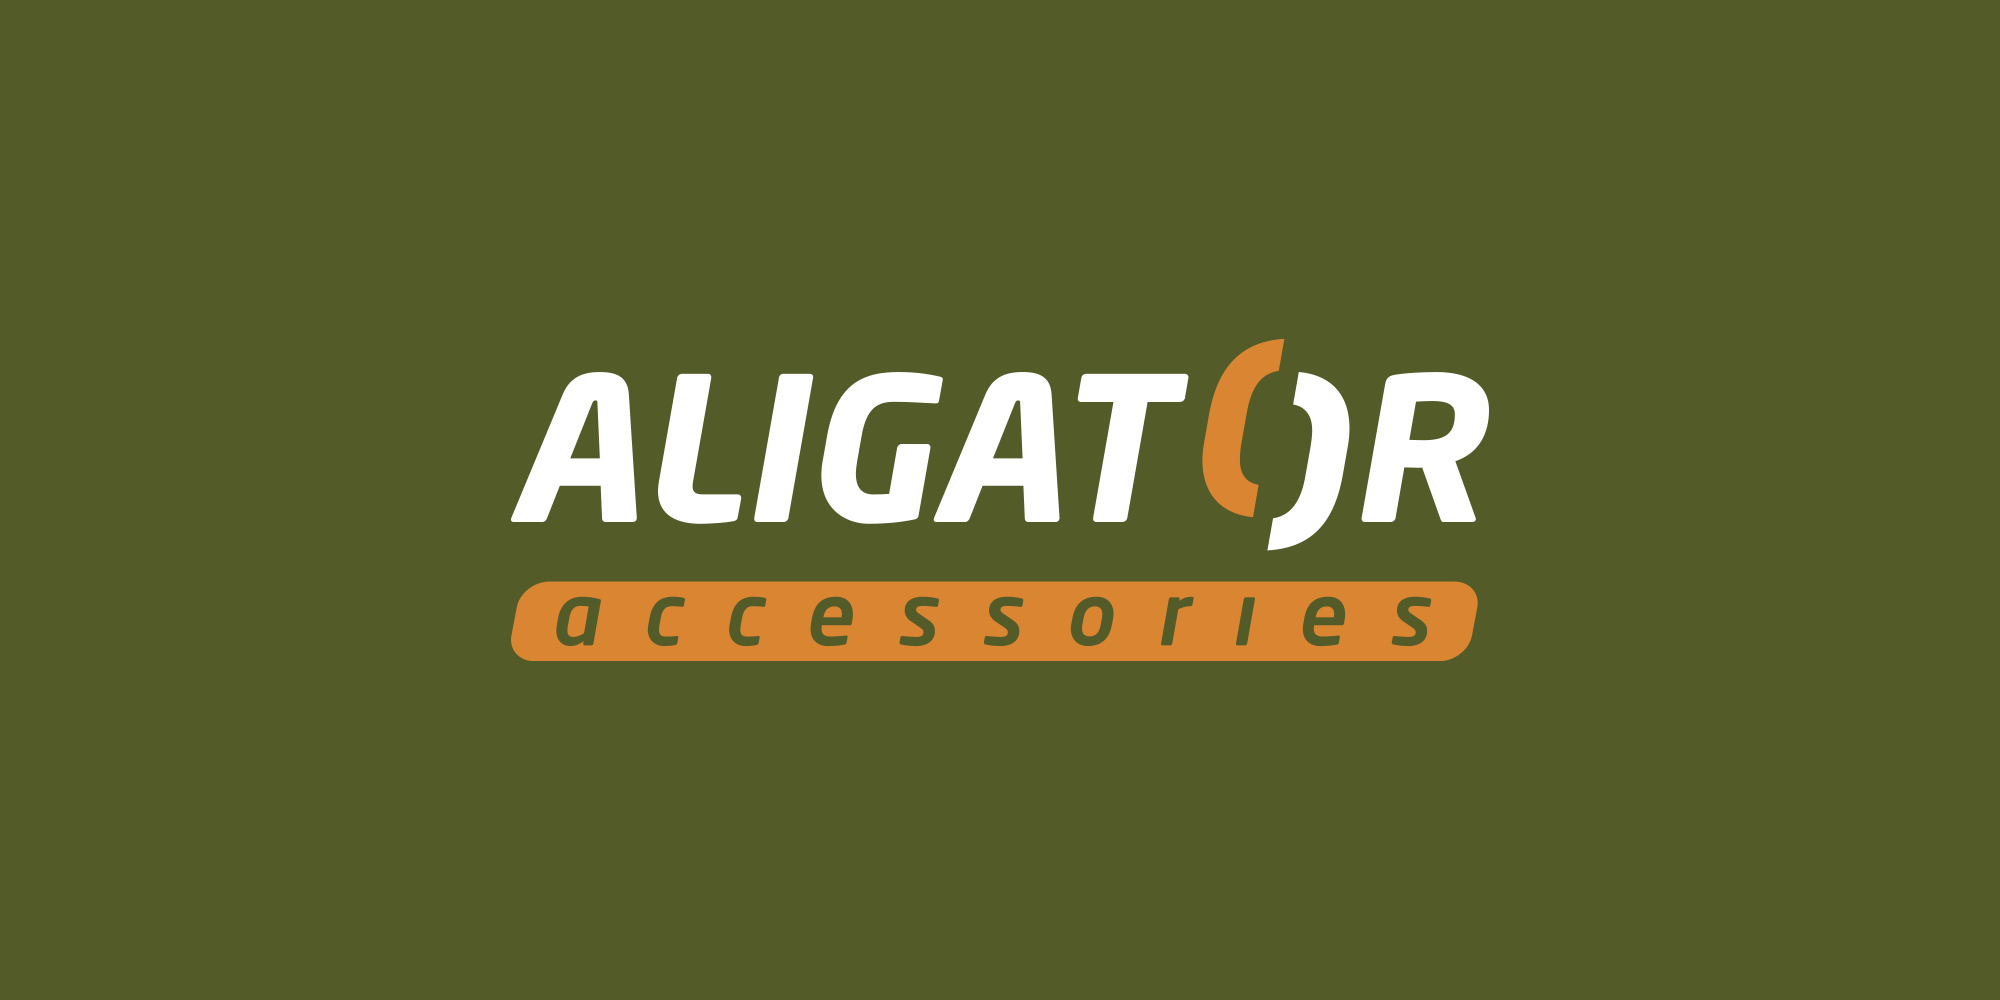 [album/Products_Model_Product/1/aligator-ci_6.png]